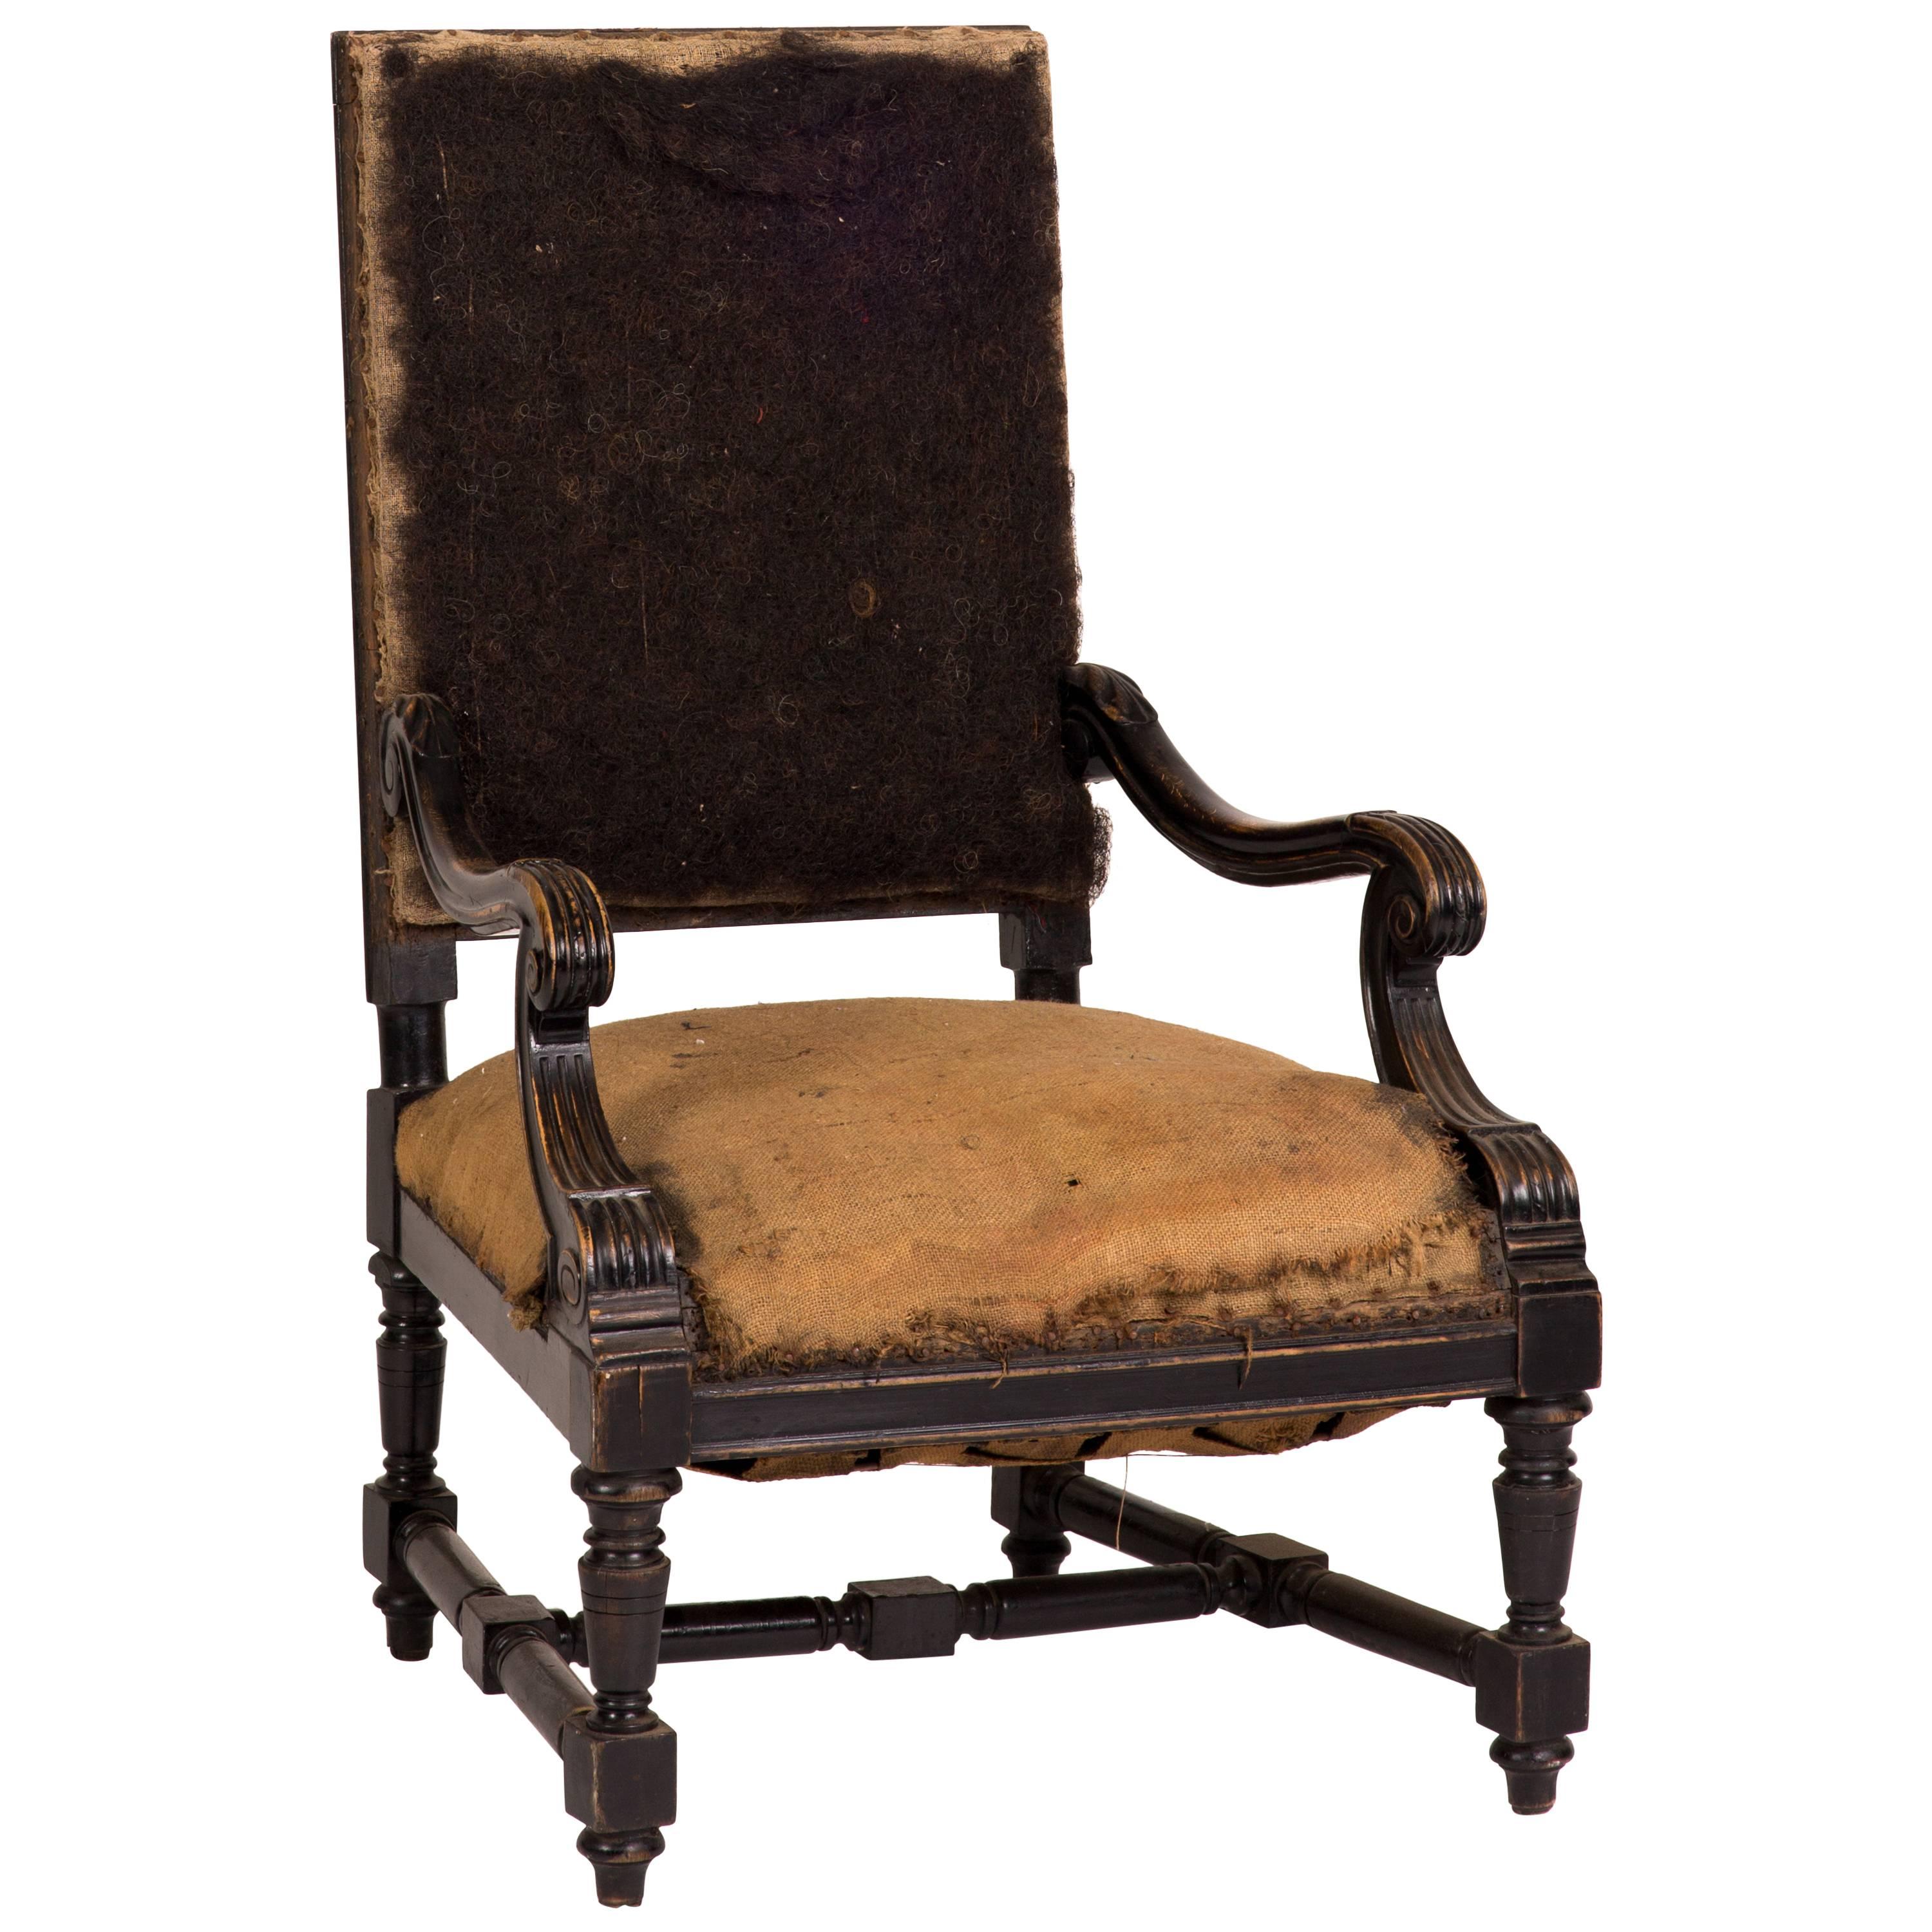 Late 19th Century French Deconstructed Upholstered Arm Chair